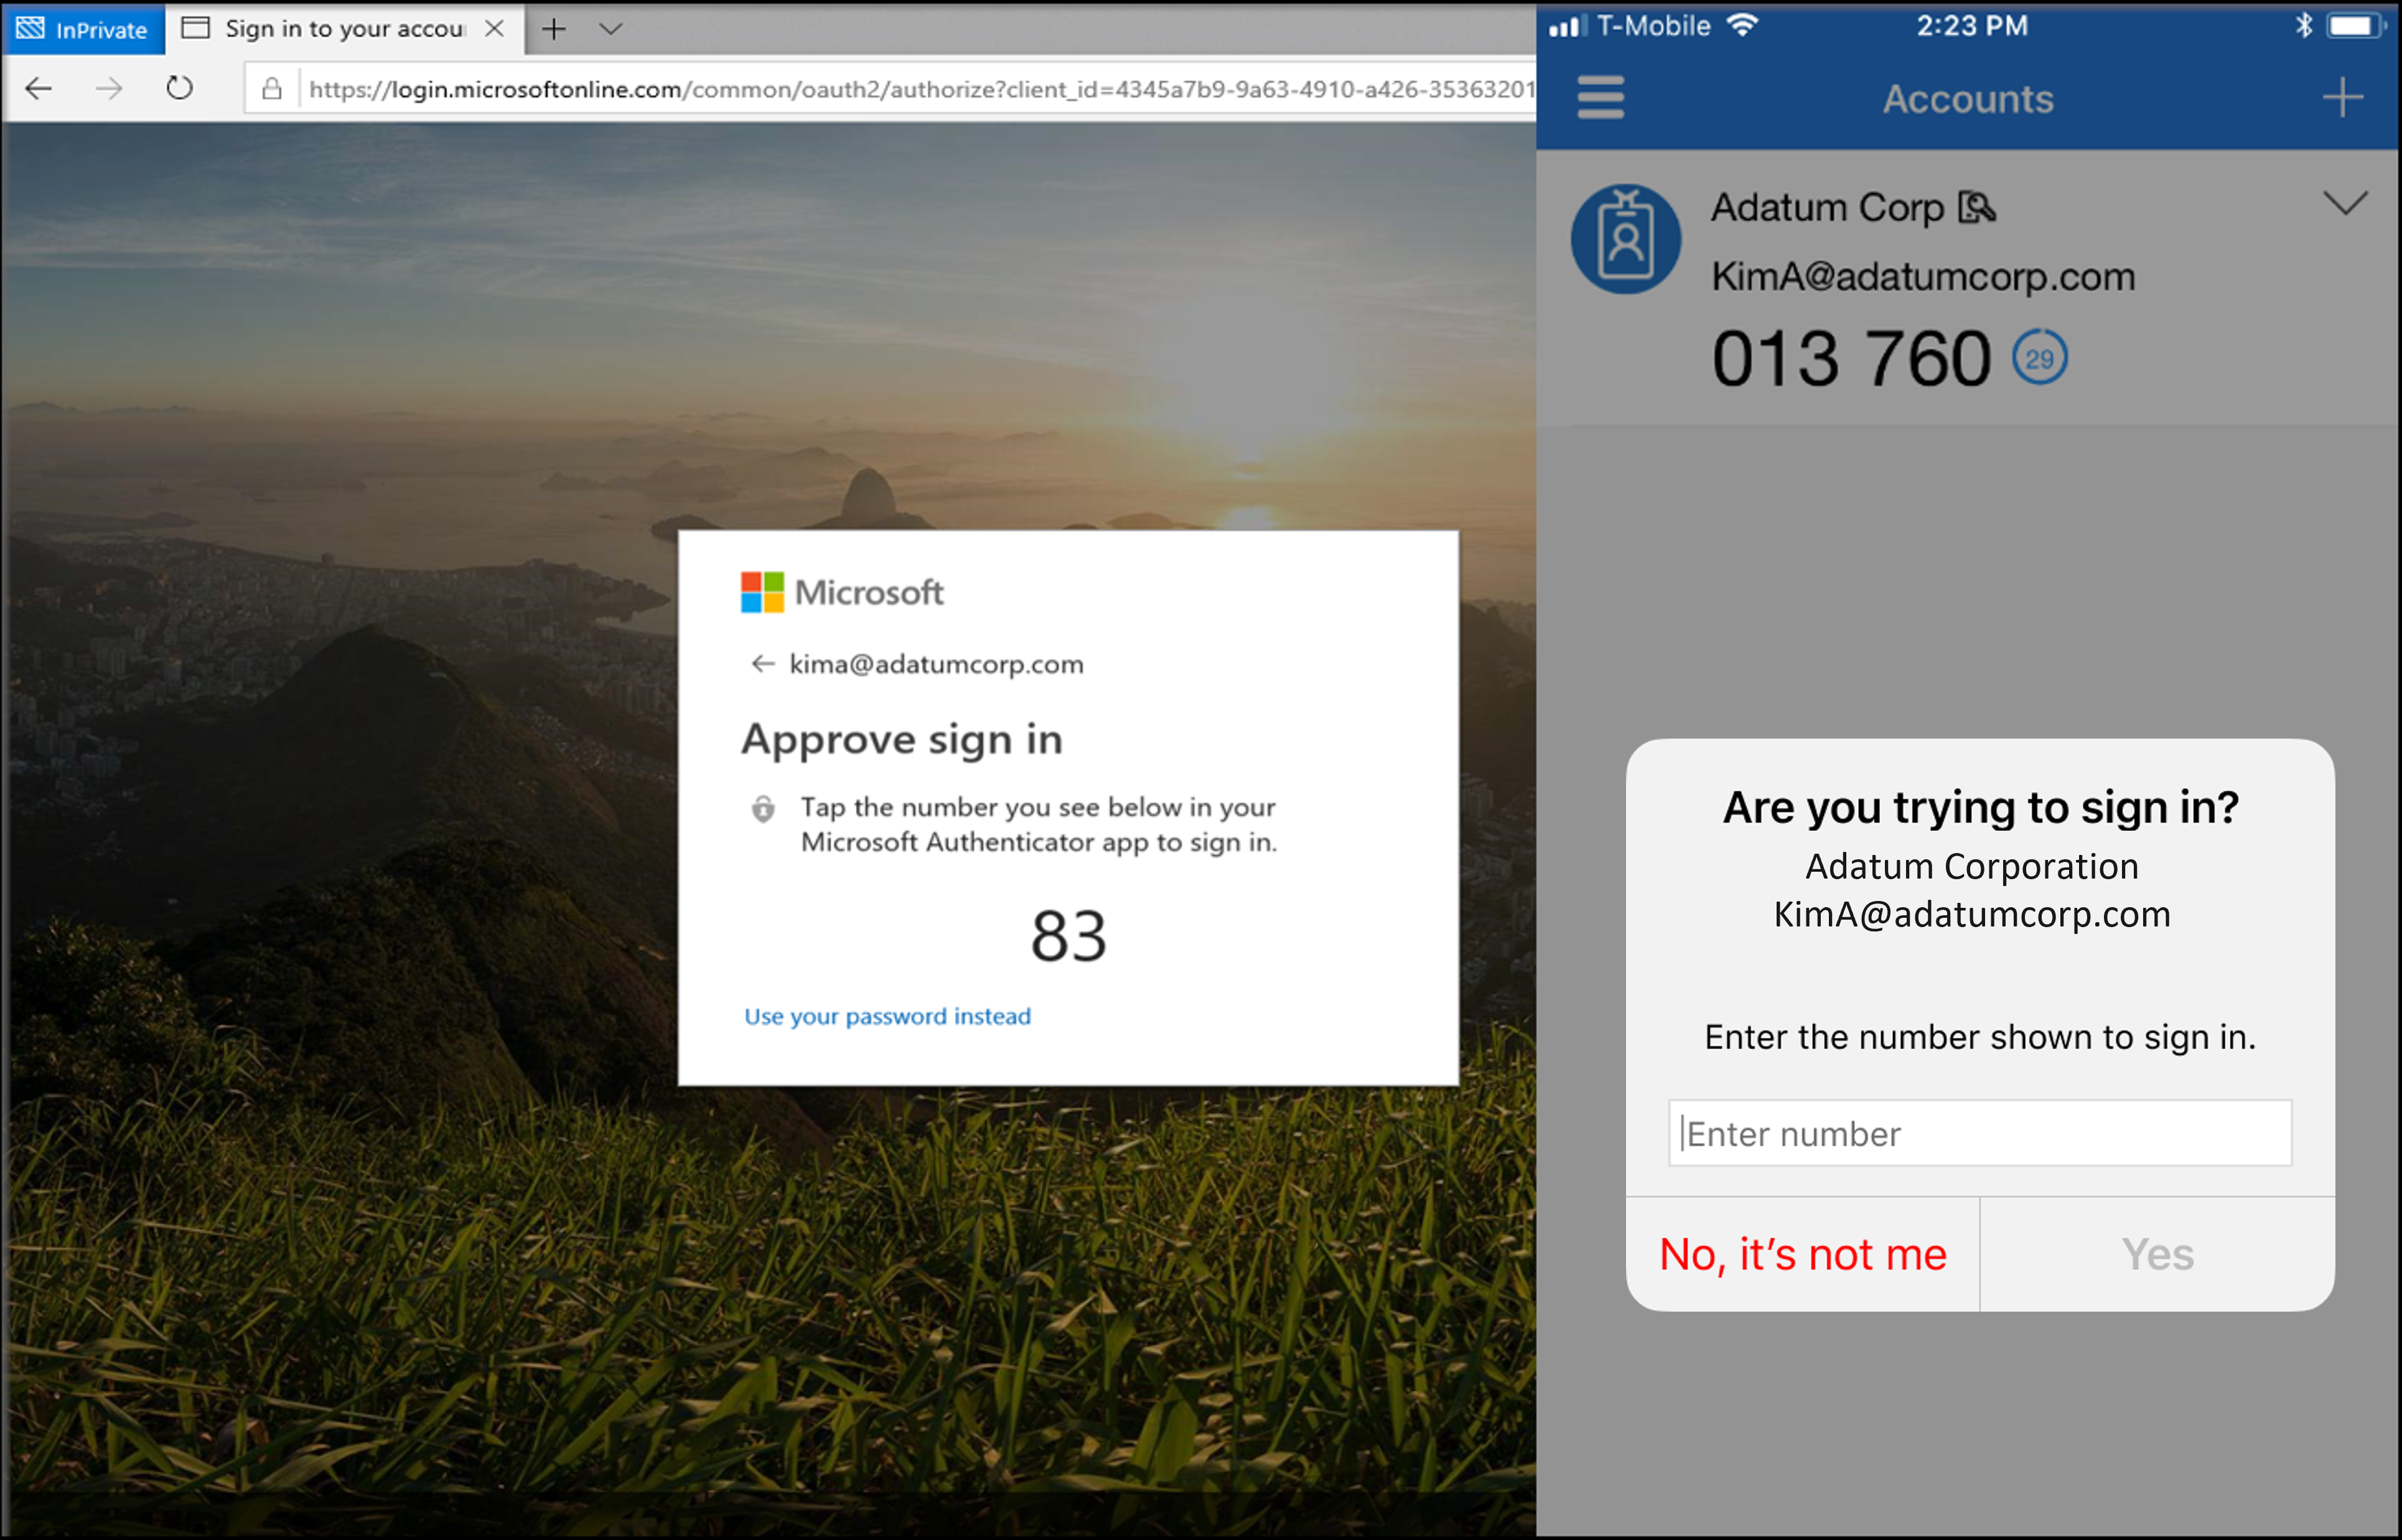 Number matching will show a number provided by Microsoft and users will have to type that number into their app to complete authentication.